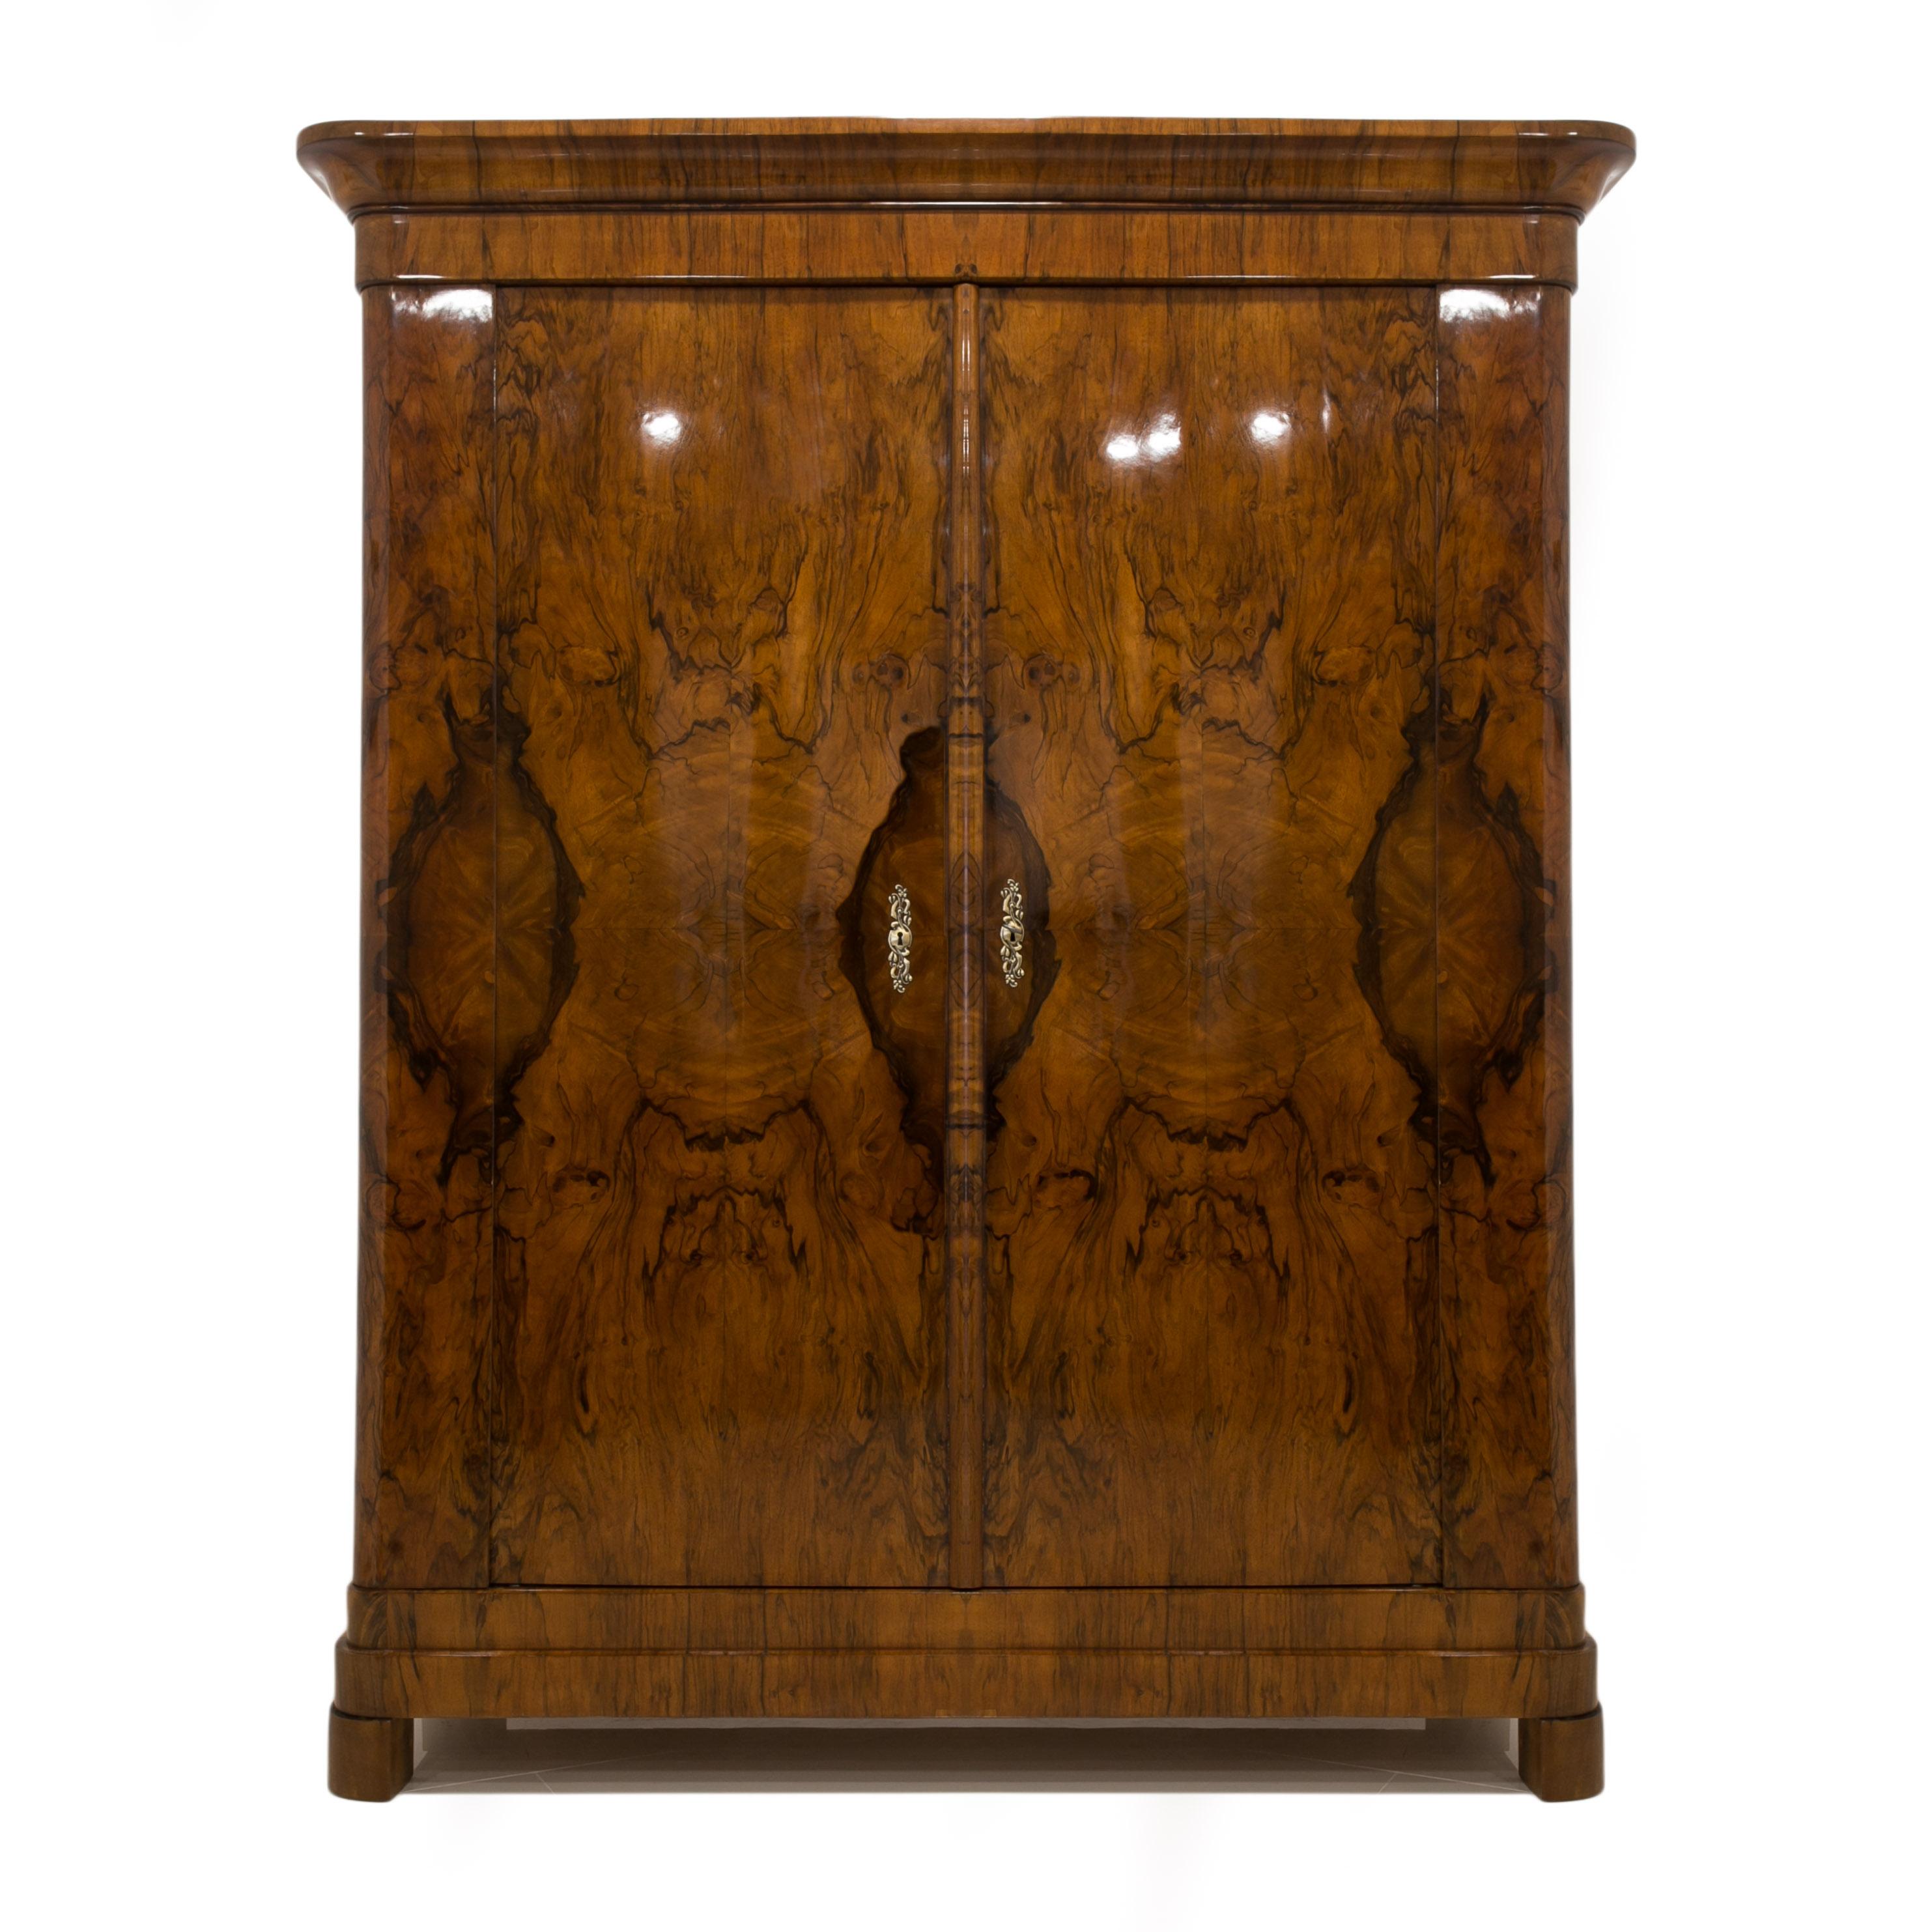 Beautiful, original Biedermeier wardrobe made of softwood veneered with walnut. The piece comes from Germany from 19th century. A unique technique of veneering was used here - one veneer leaf from top to bottom, starting from the cornice, through